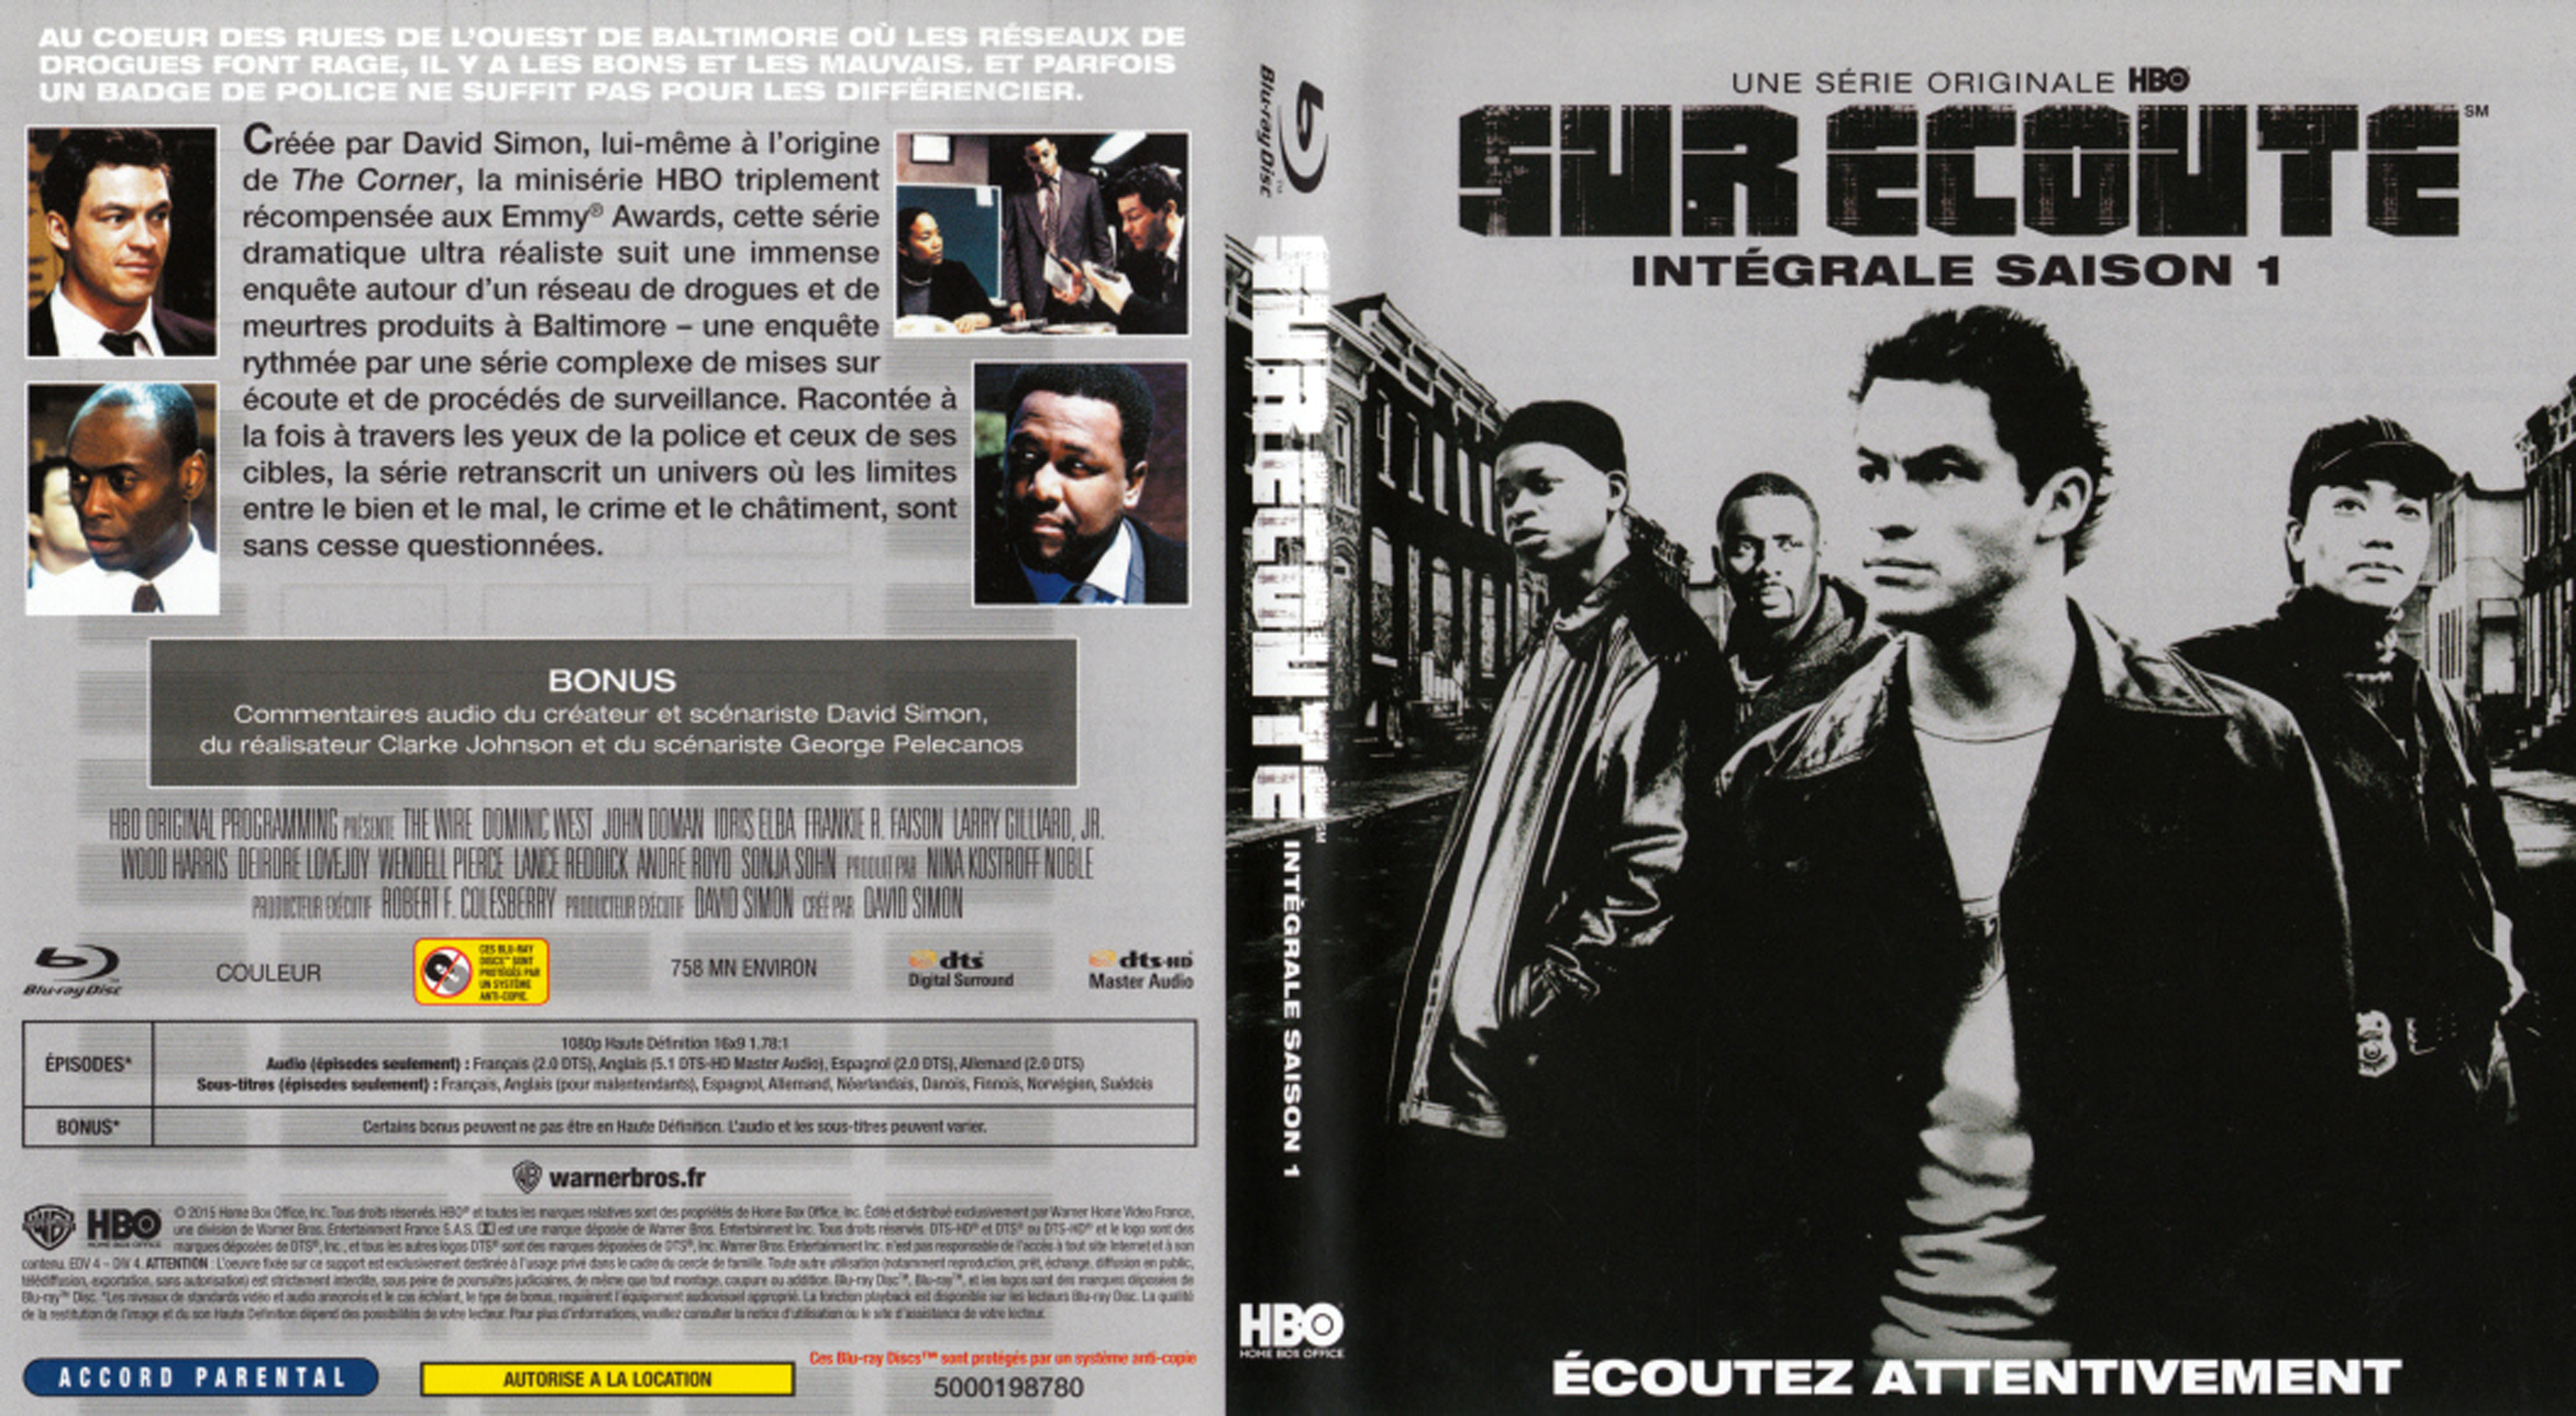 Jaquette DVD The wire - Sur coute Saison 1 (BLU-RAY)